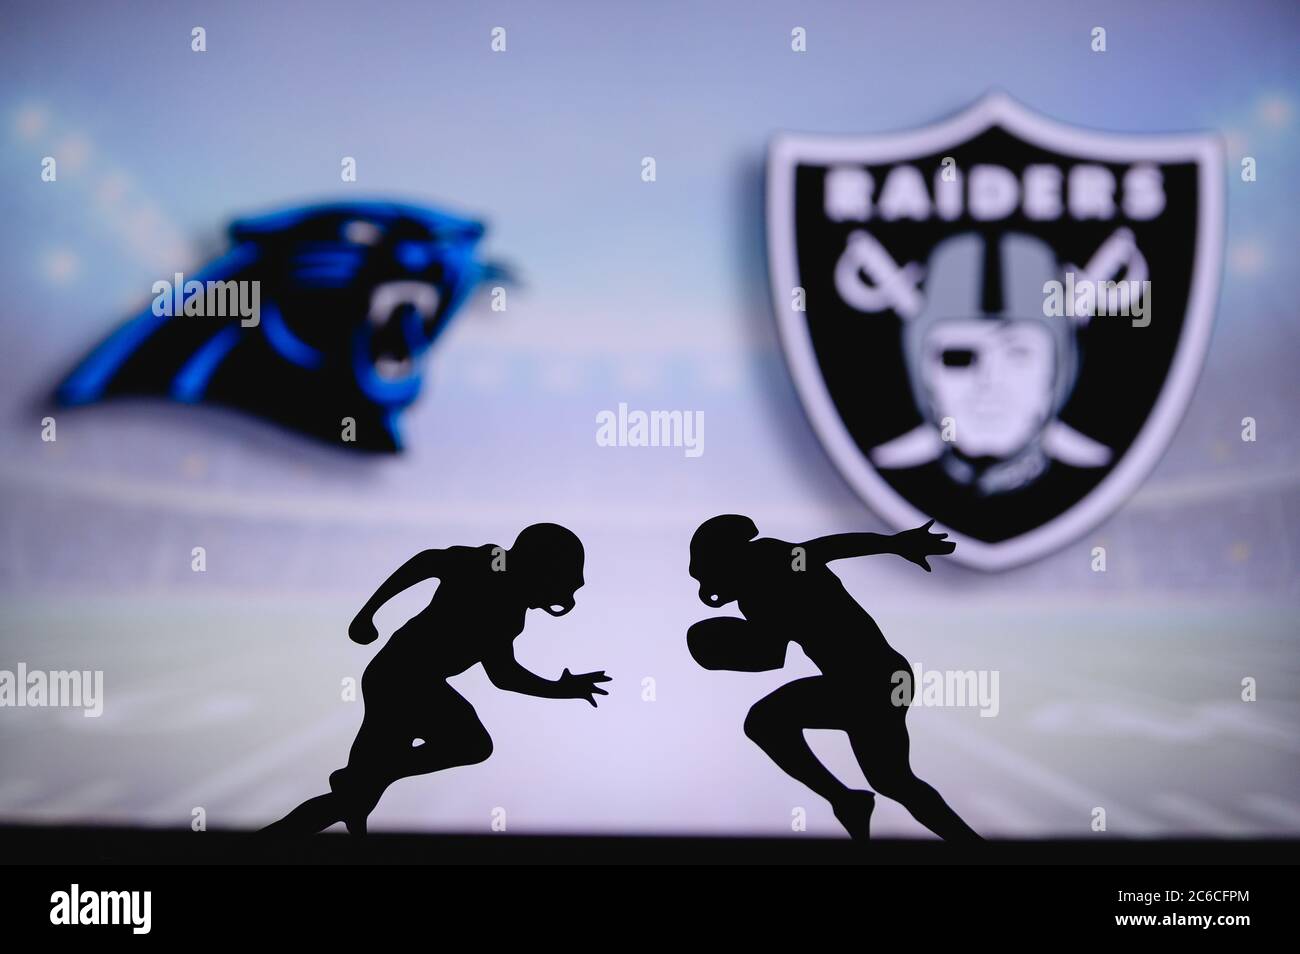 Carolina Panthers vs. Las Vegas Raiders. NFL match poster. Two american football players silhouette facing each other on the field. Clubs logo in back Stock Photo